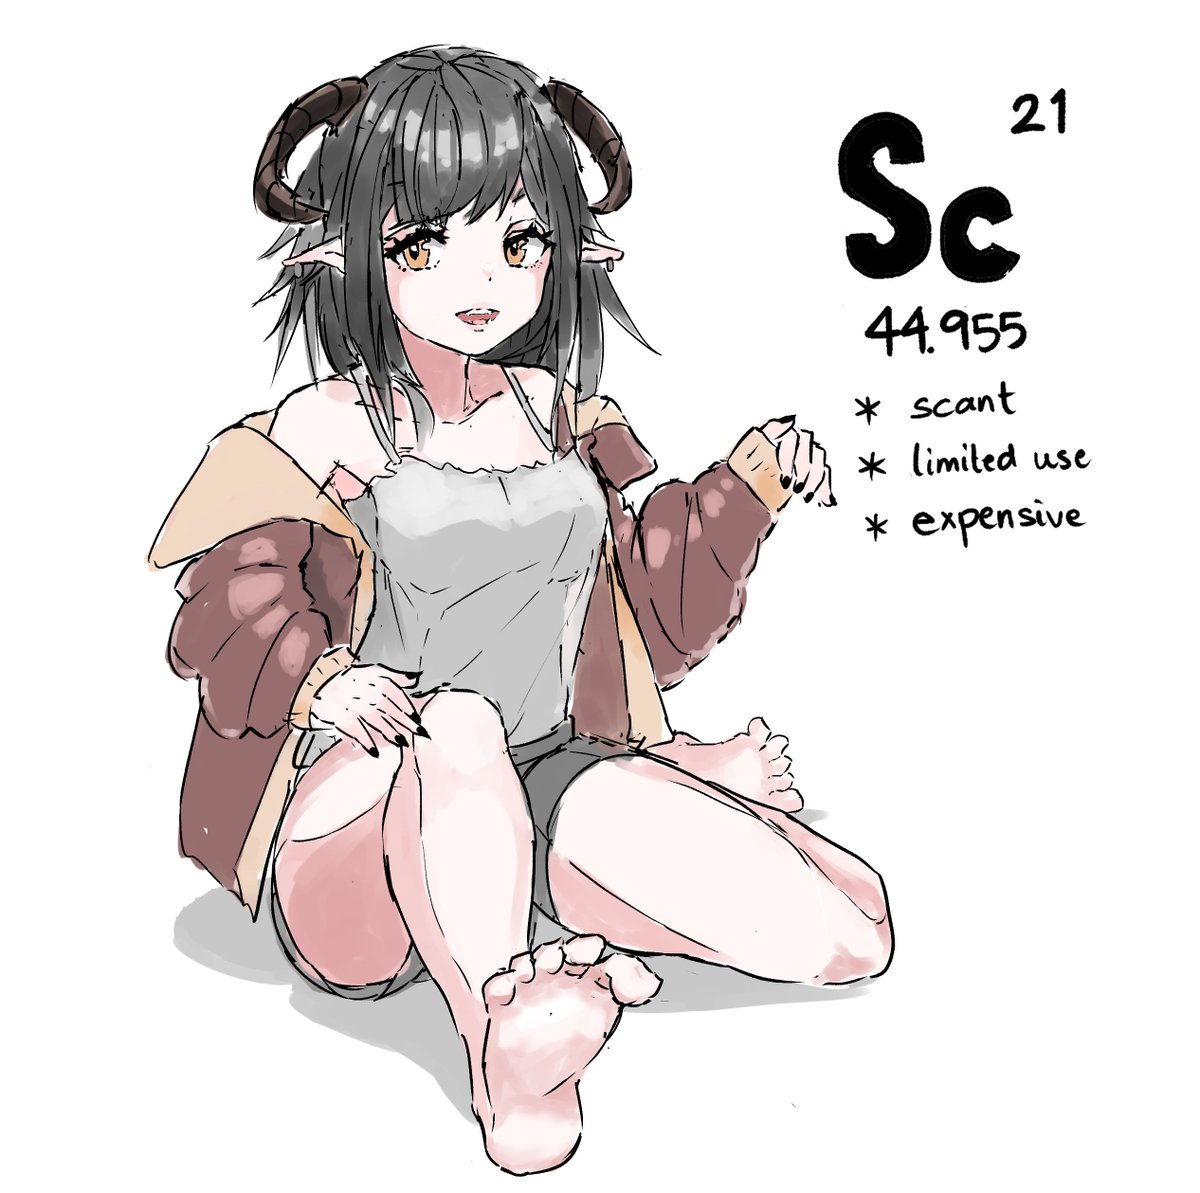 been long since i did this but Here's Scandium:* scant* limited use* expensive #oneelementperworkout